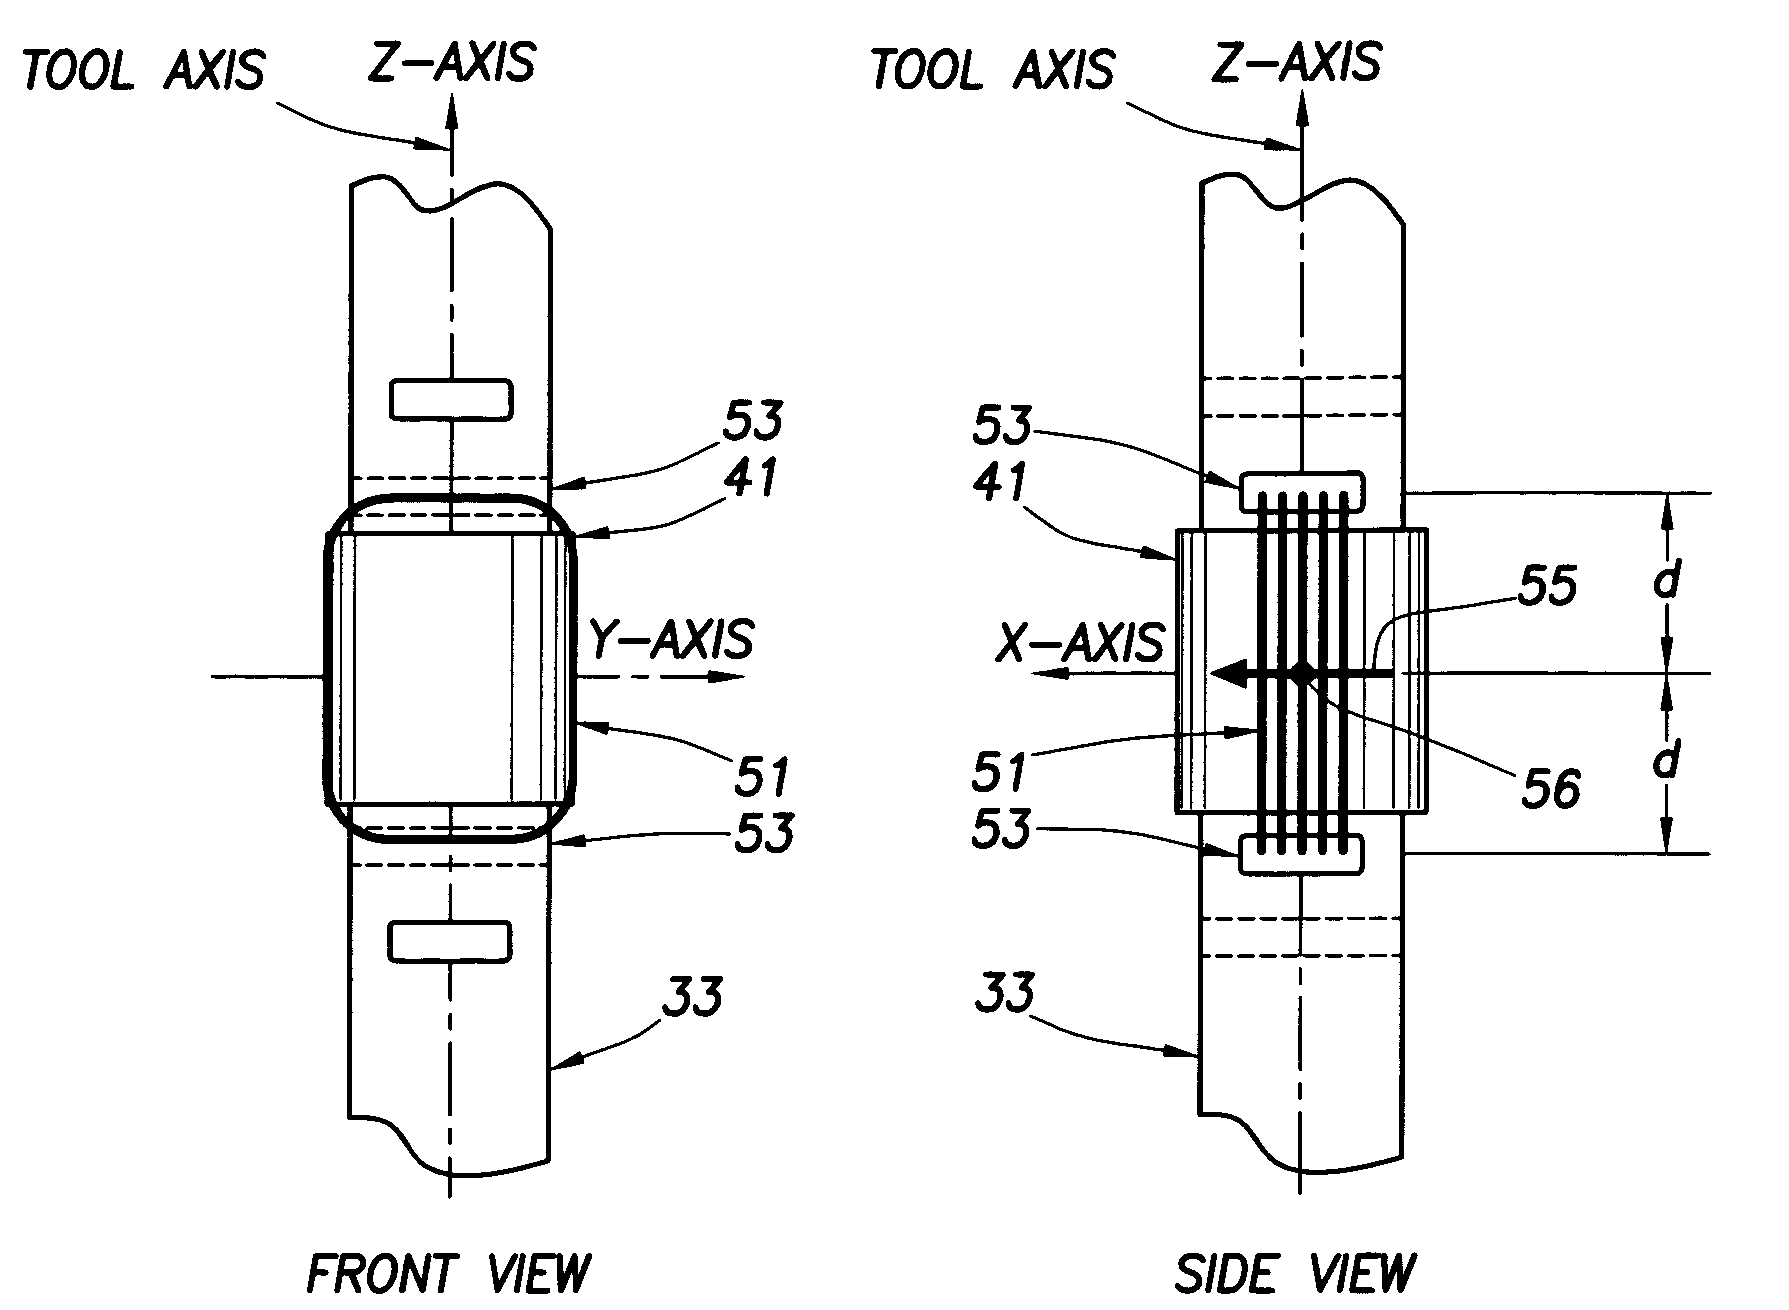 Constructing co-located antennas by winding a wire through an opening in the support